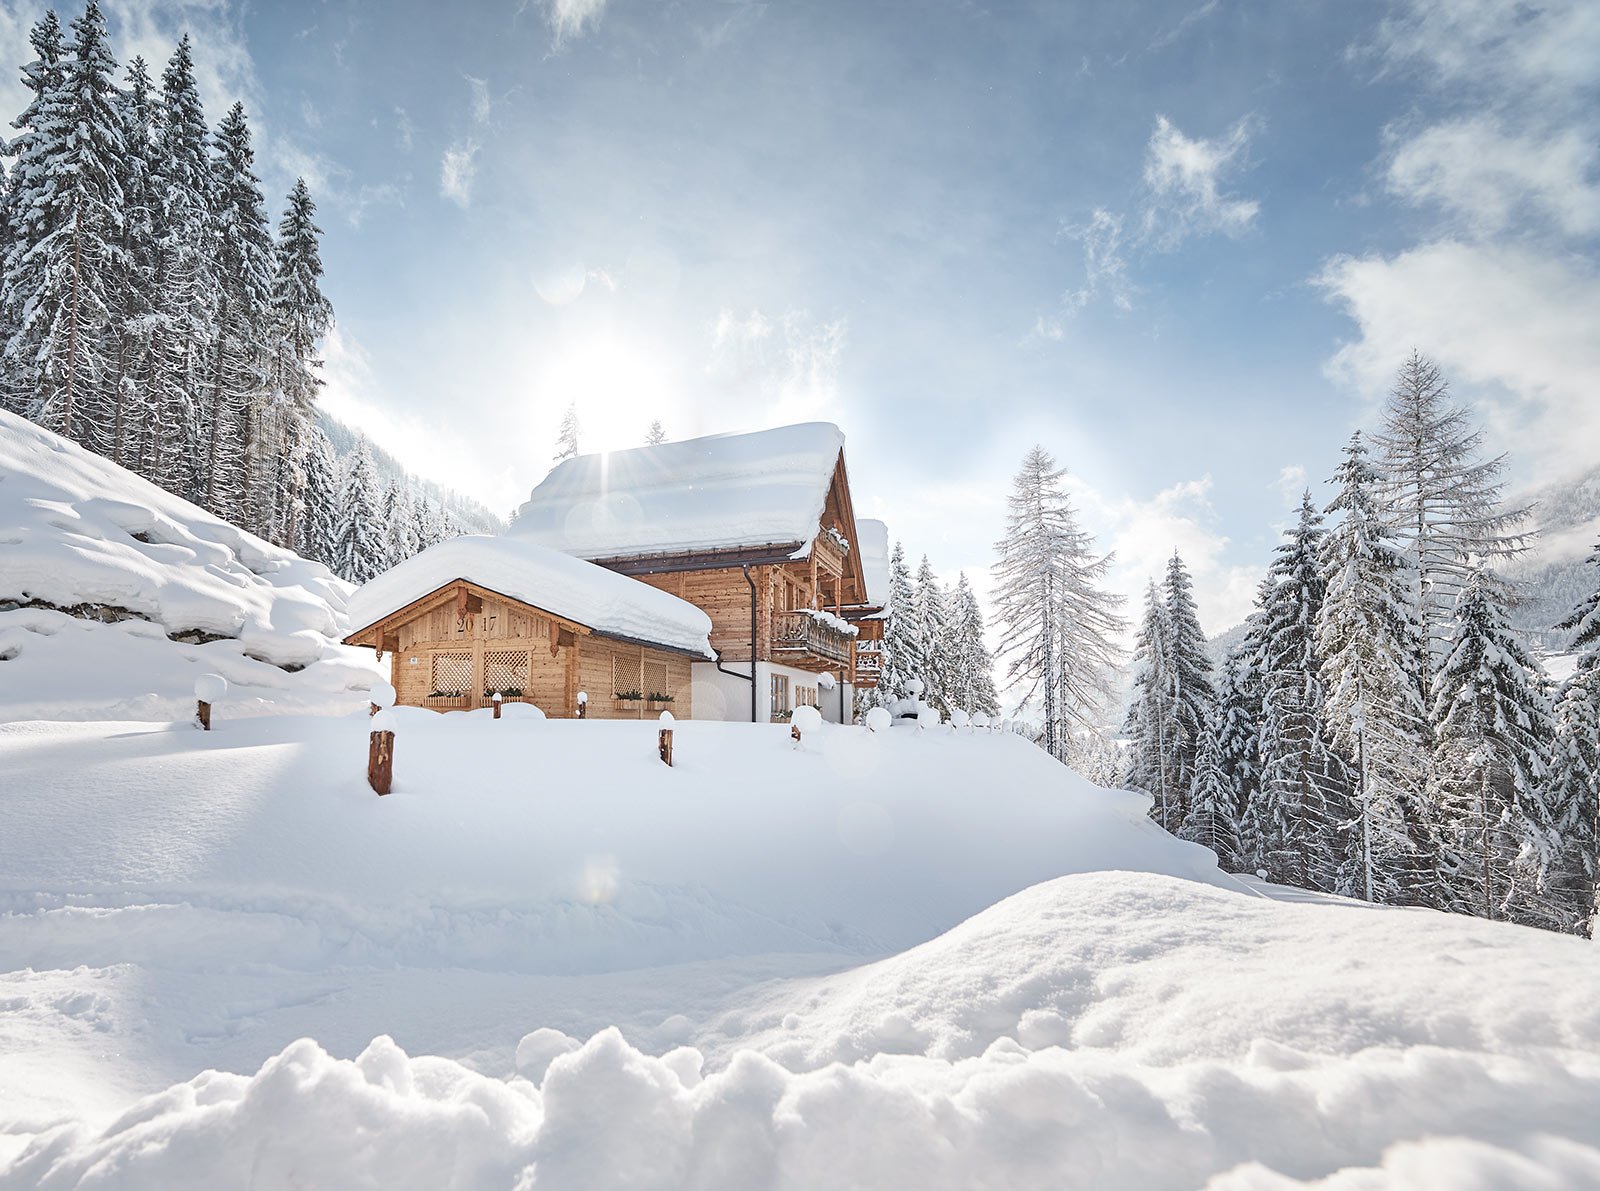 Pretty Hotels: Where to Stay in Your Ski Holidays (Image 15)